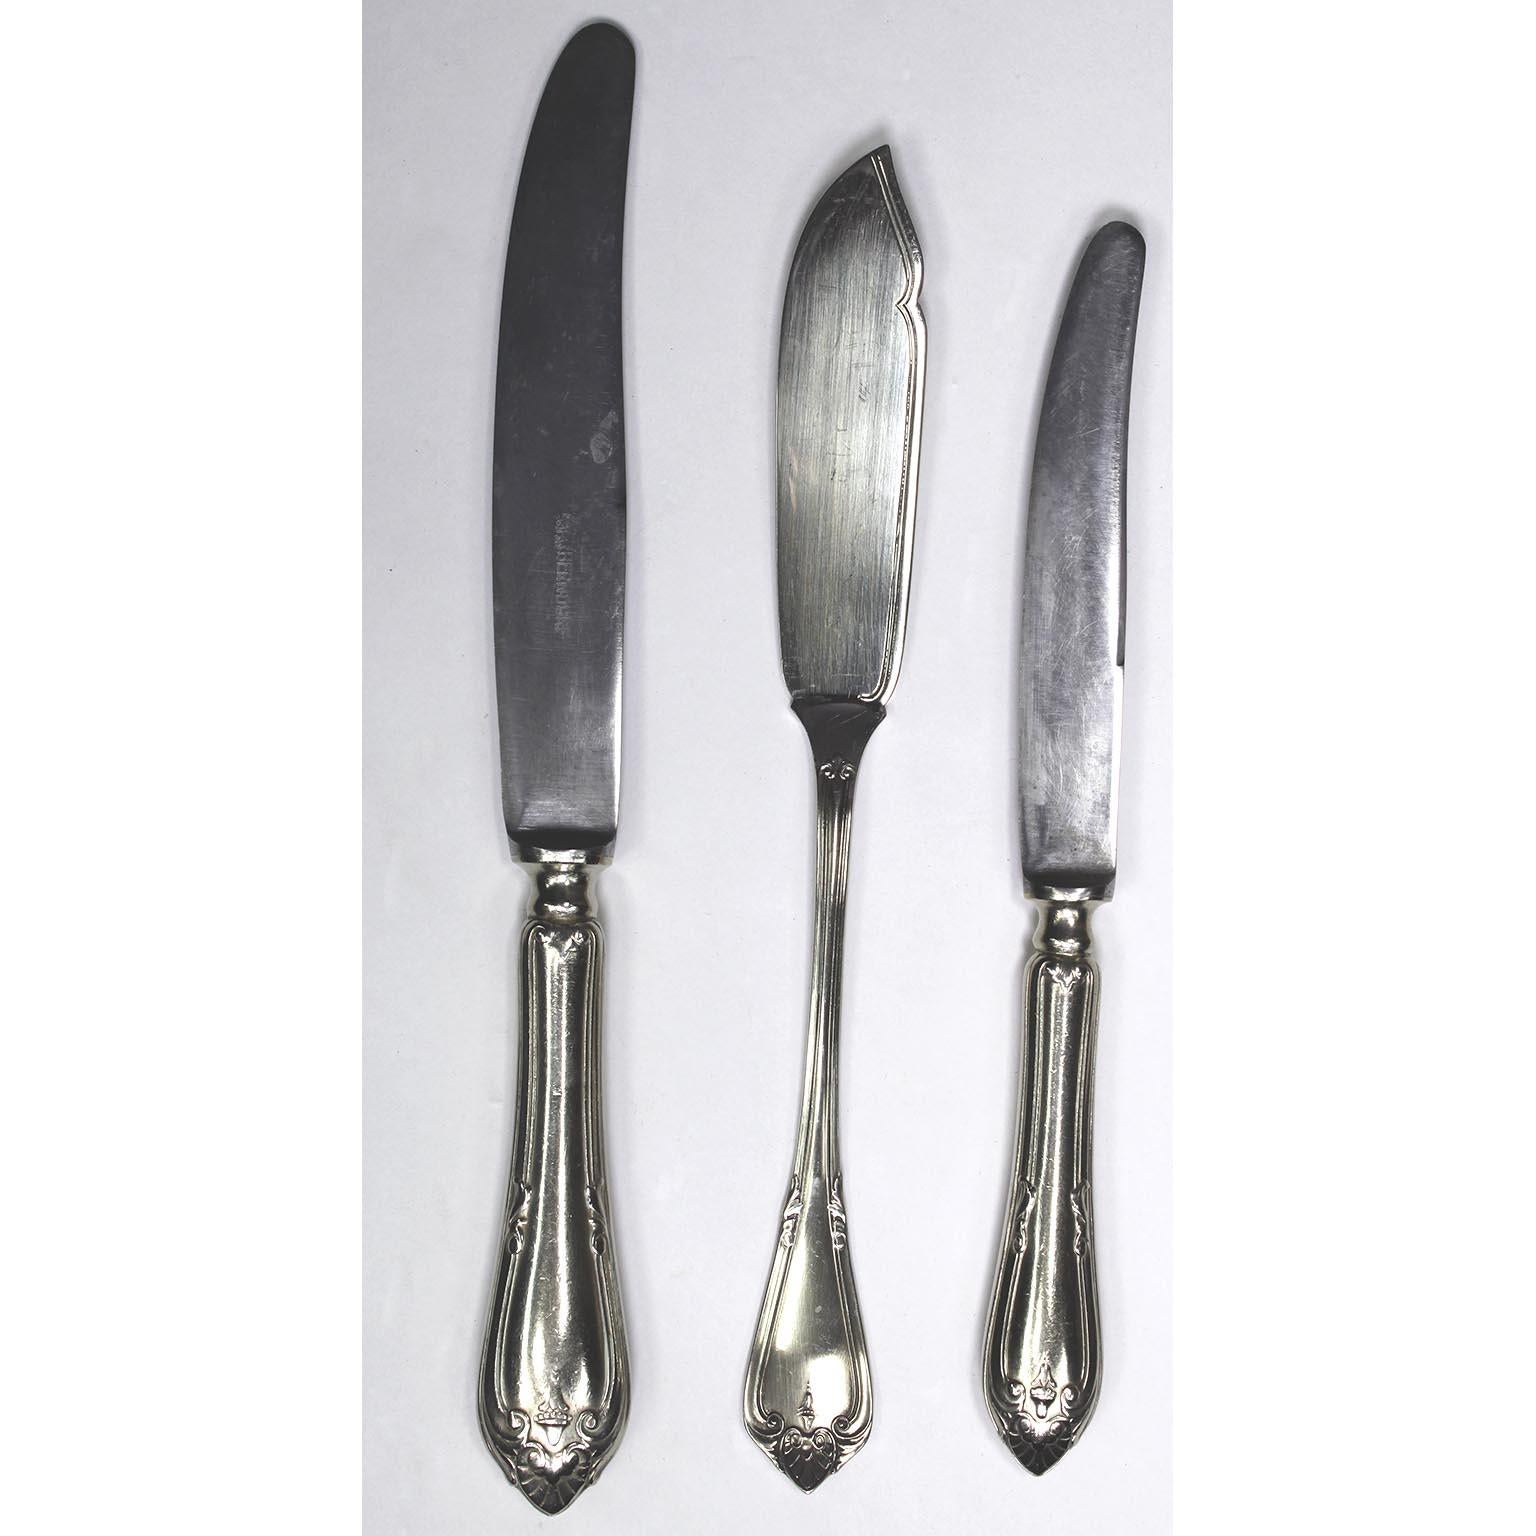 A Fine Early 20th Century 152 Piece Austrian Flatware Set by Berndorf Alpacca In Good Condition For Sale In Los Angeles, CA